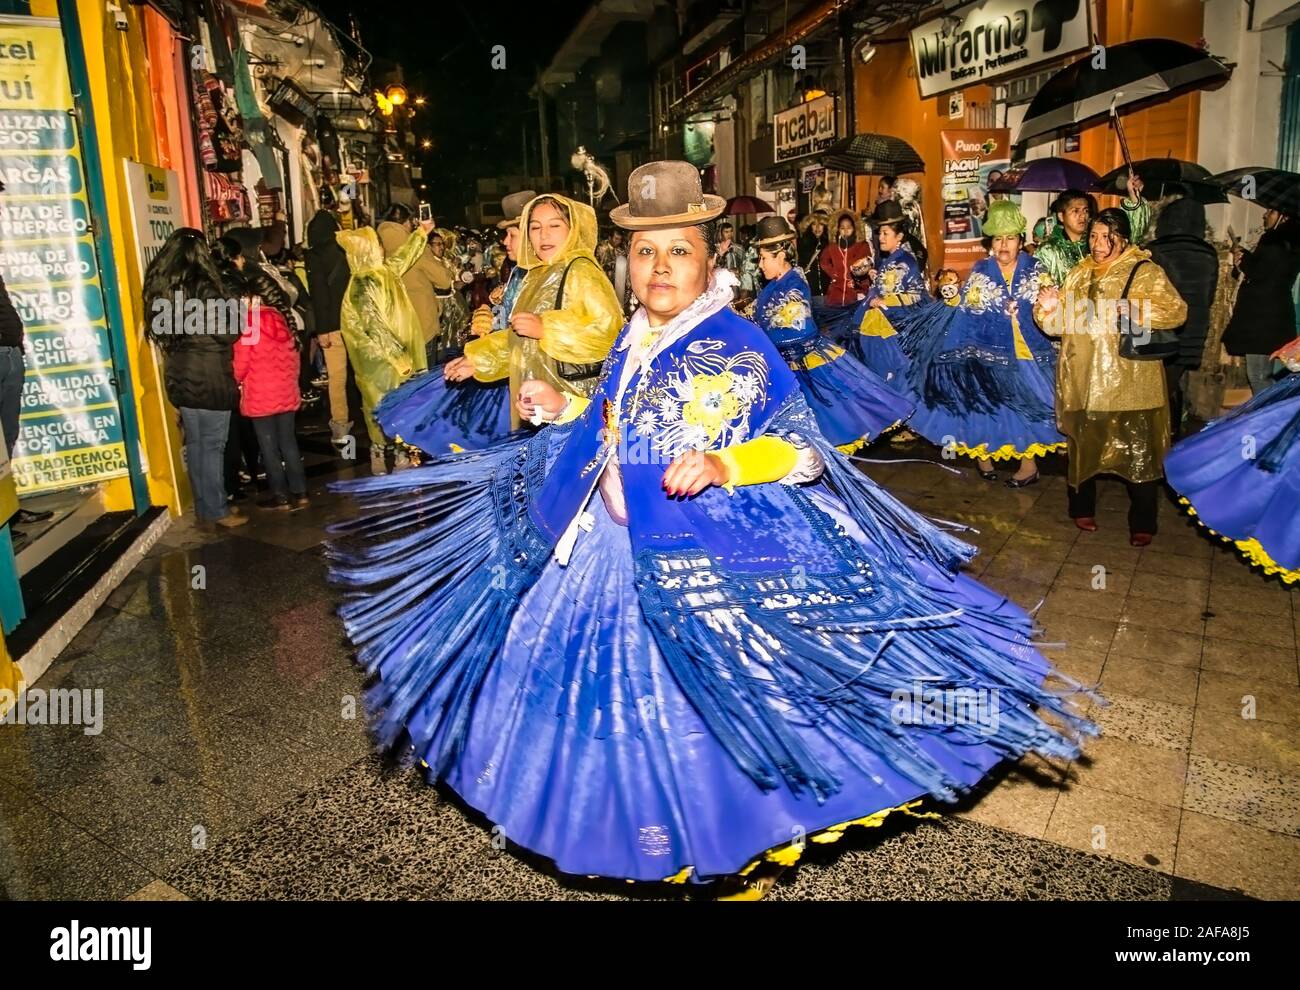 Puno, Peru - Jan 5, 2019: Authentic Colorful Carnival on the streets of Puno by night, Peru near the high altutude Titicaca lake . South America. Stock Photo